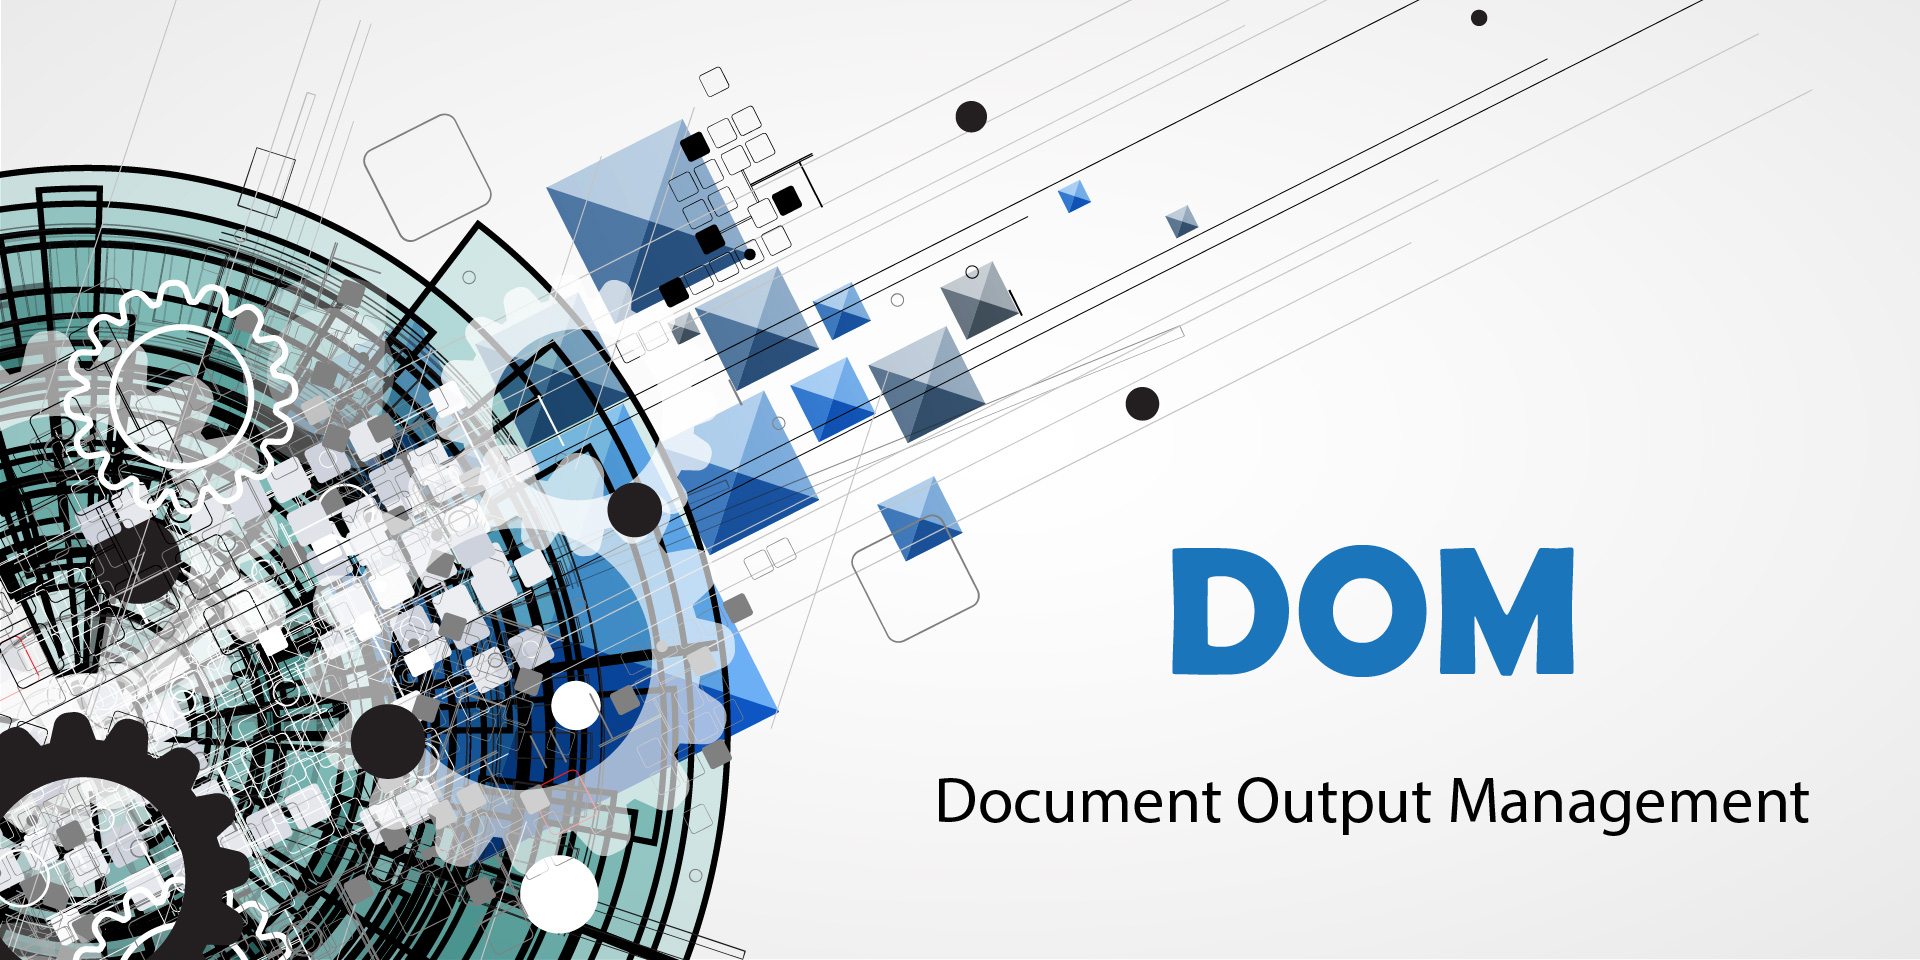 The concept of Document Output Management is constantly evolving. It can be defined as the management of document outputs throughout the whole document process.